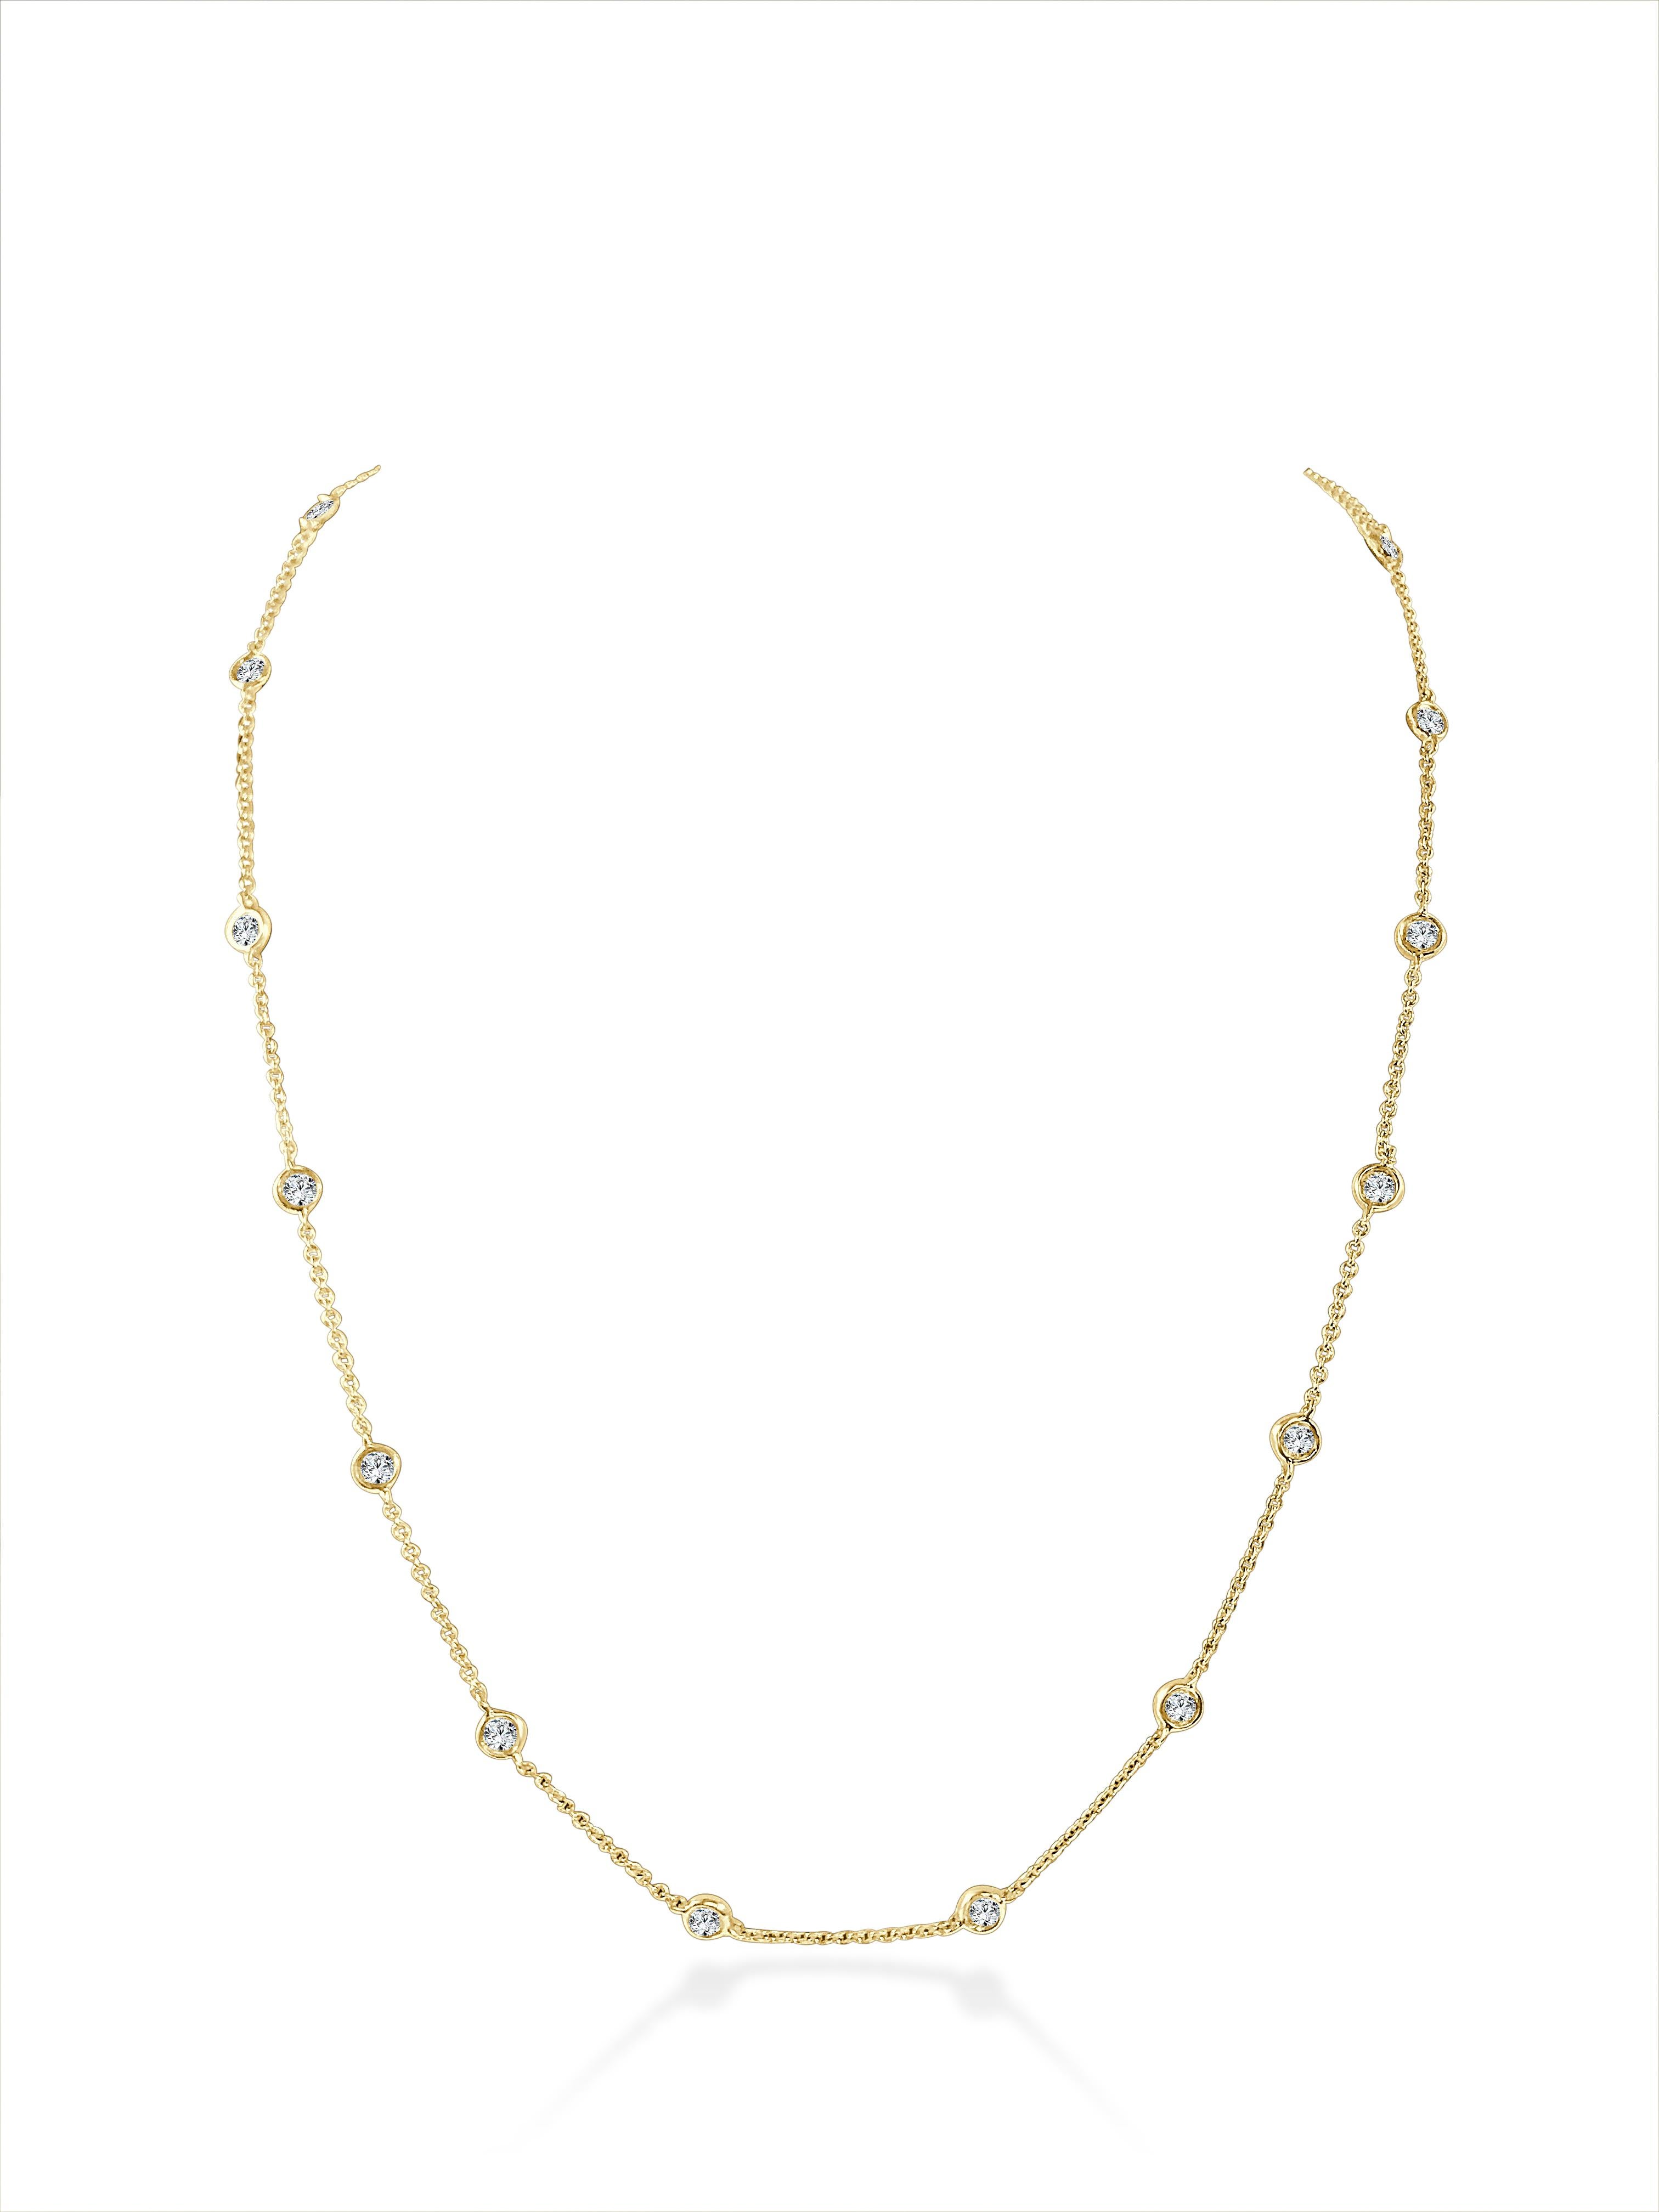 Baguette Cut 14K Yellow Gold 1.30ct Diamond by the Yard Necklace for Her For Sale